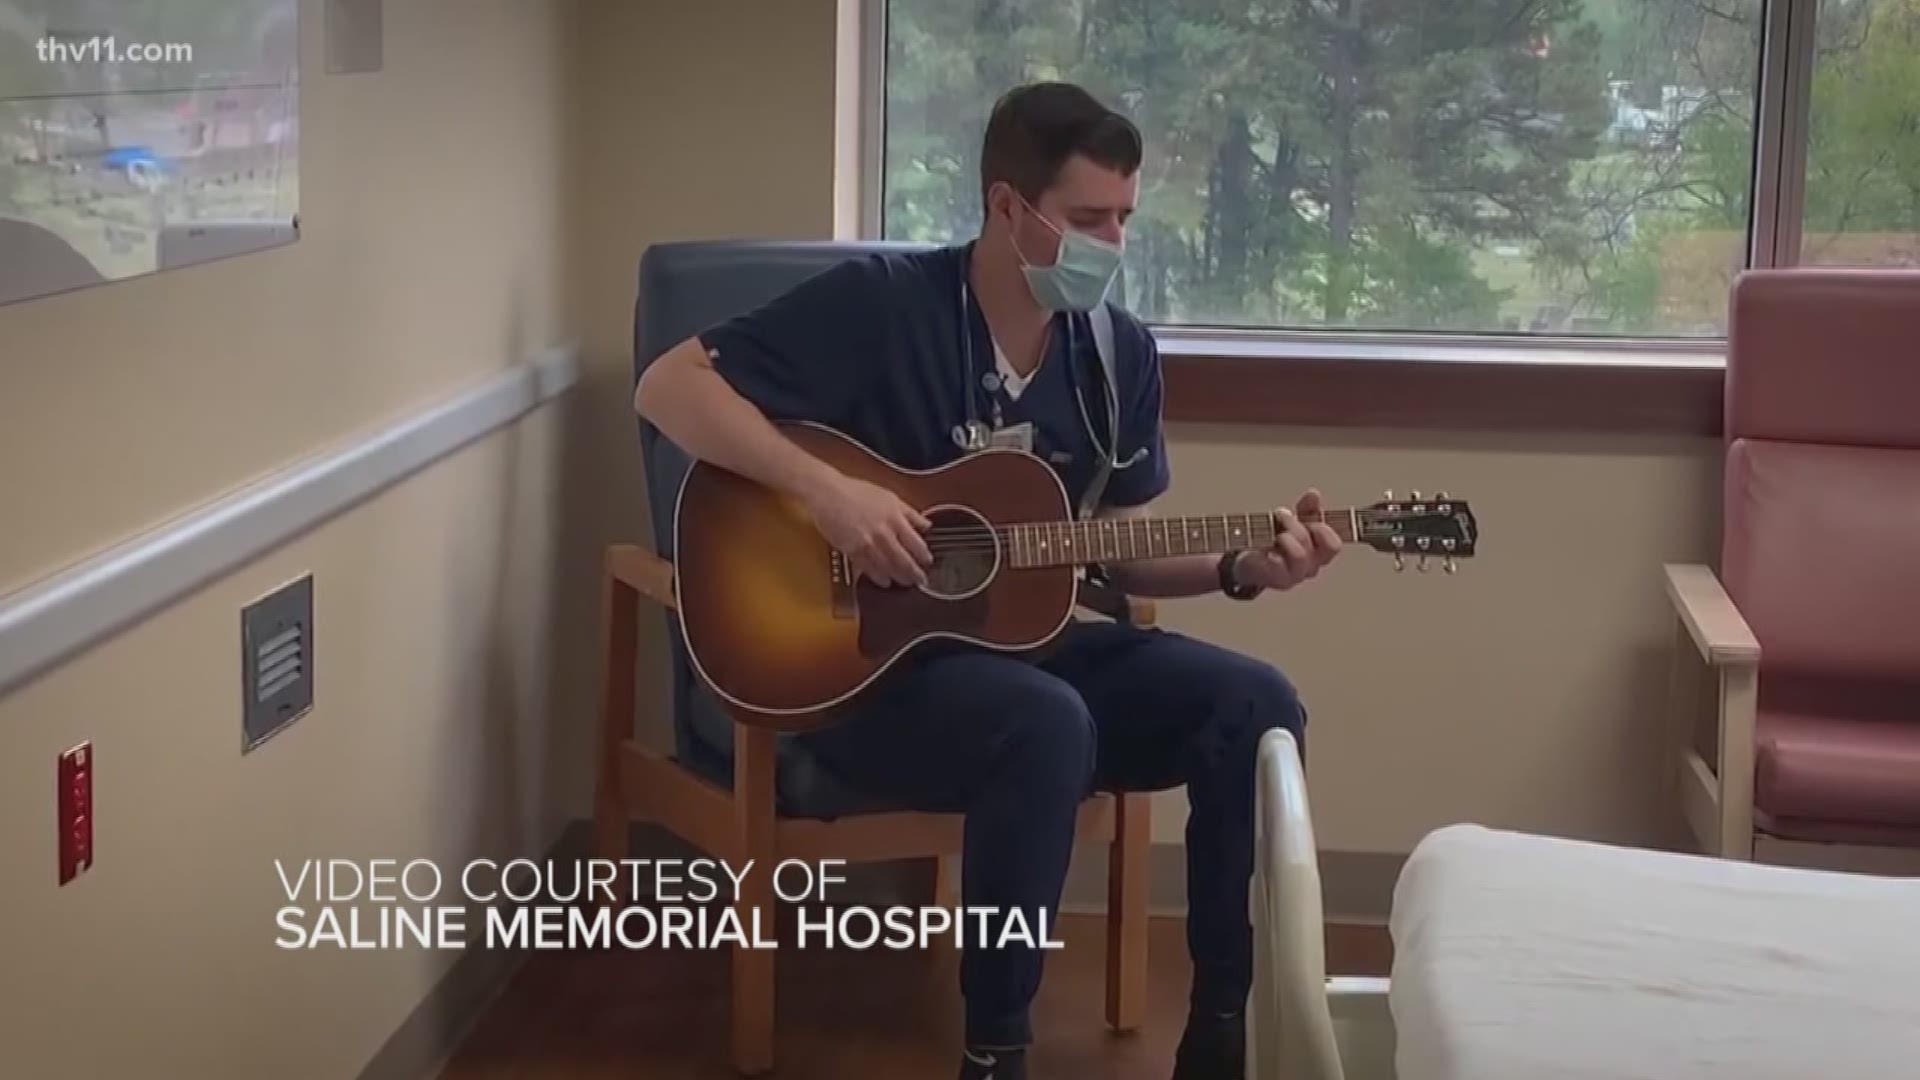 Nurse Mike Stramiello said the coronavirus had patients and staff feeling the tension at the hospital. So, he pulled out his guitar and sang a couple tunes.